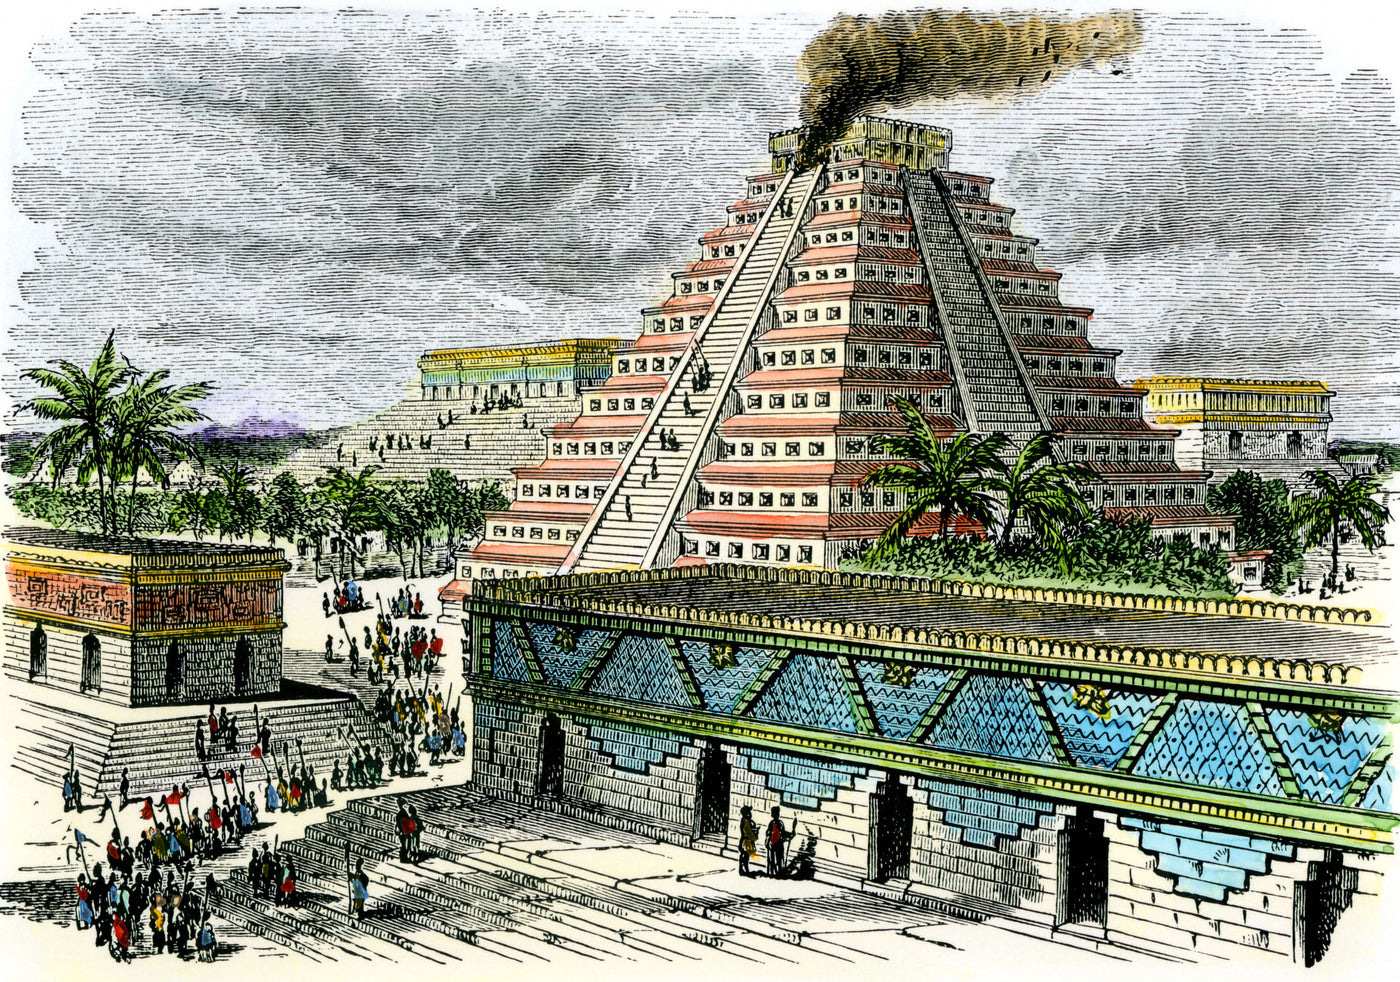 Painting of a Mayan temple with smoke billowing from the top